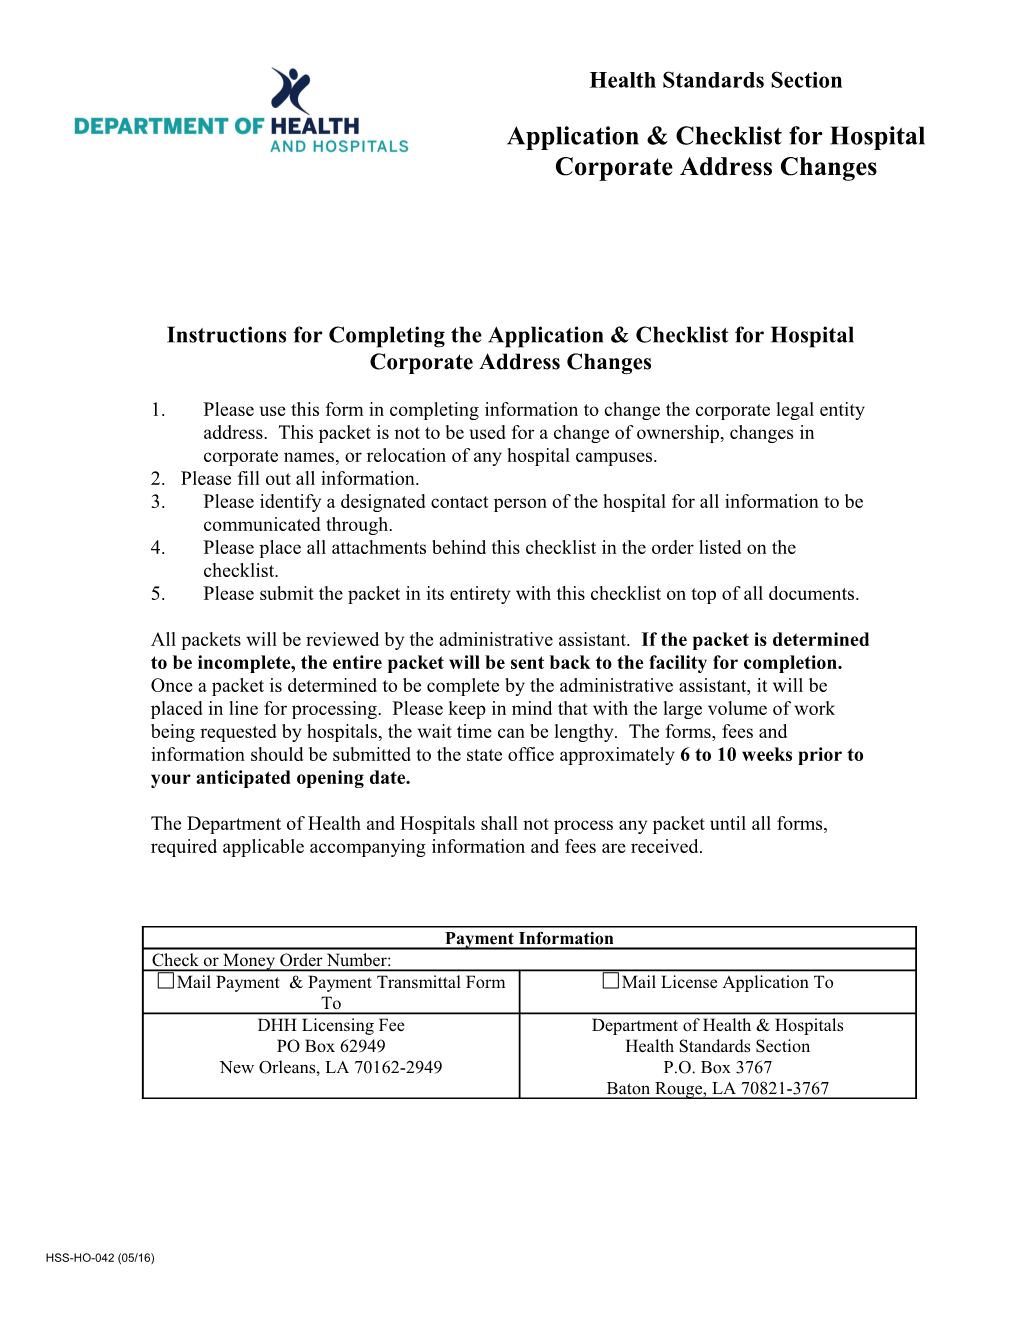 Instructions for Completing the Application & Checklist for Hospital Corporate Address Changes